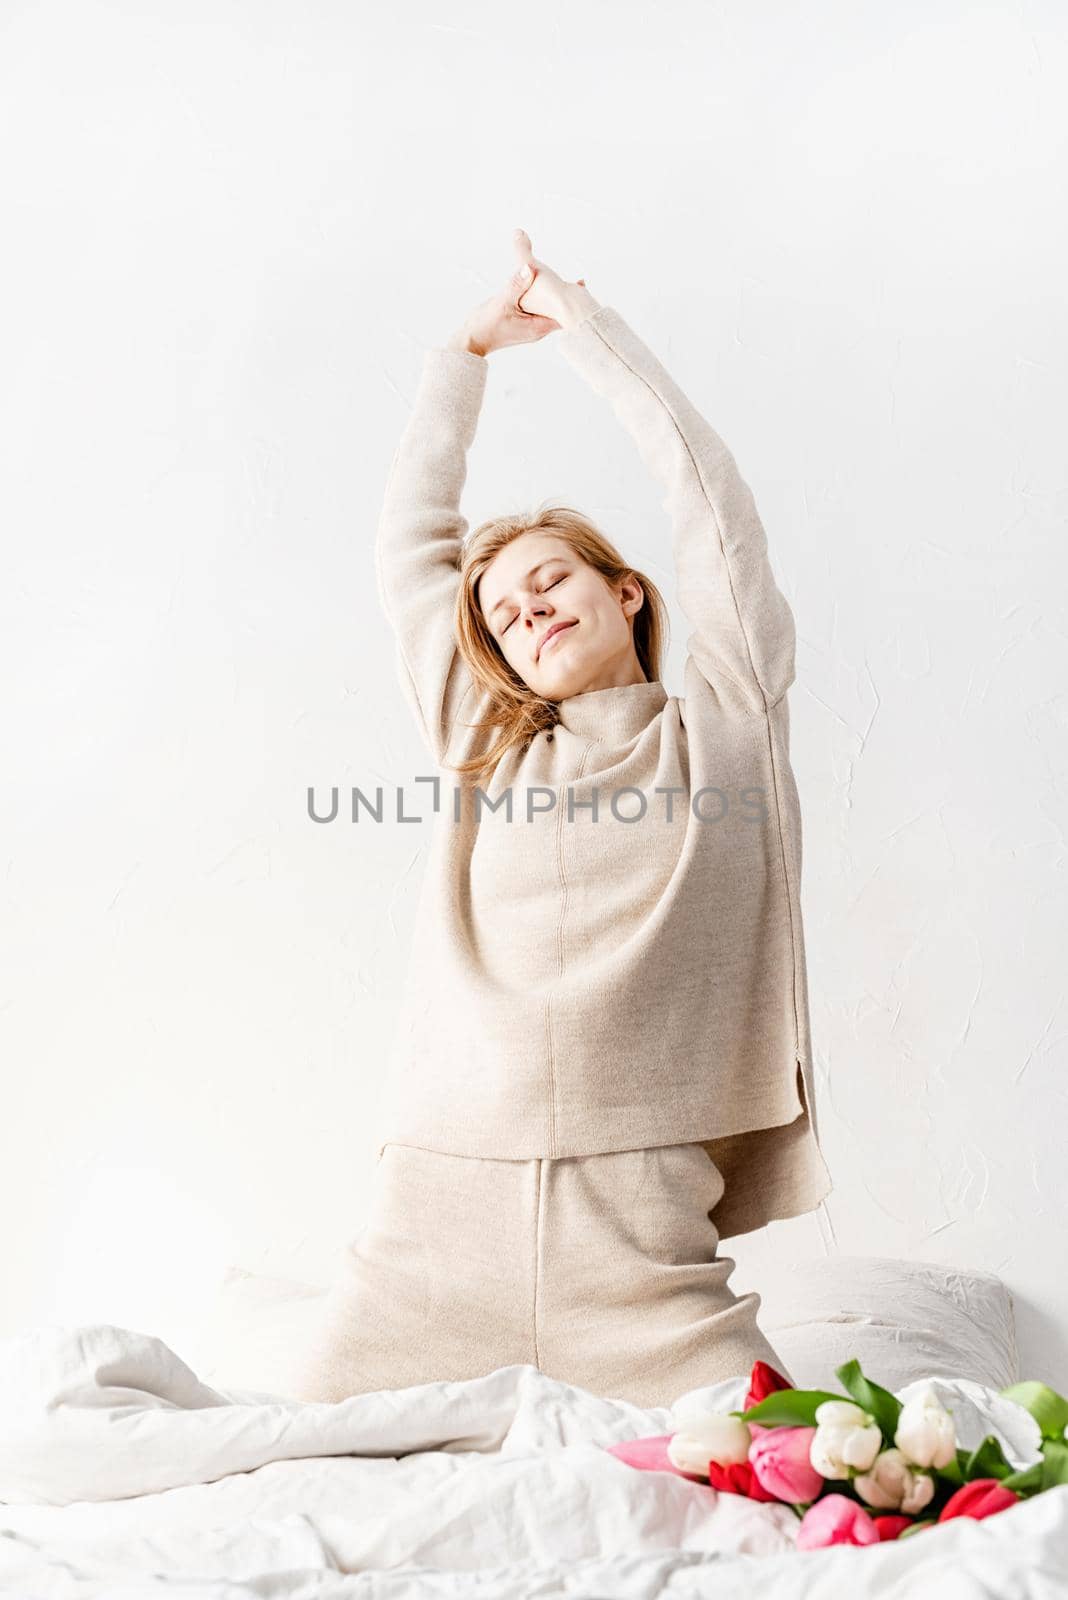 Smiling young woman wearing pajamas stretching on the bed in the morning